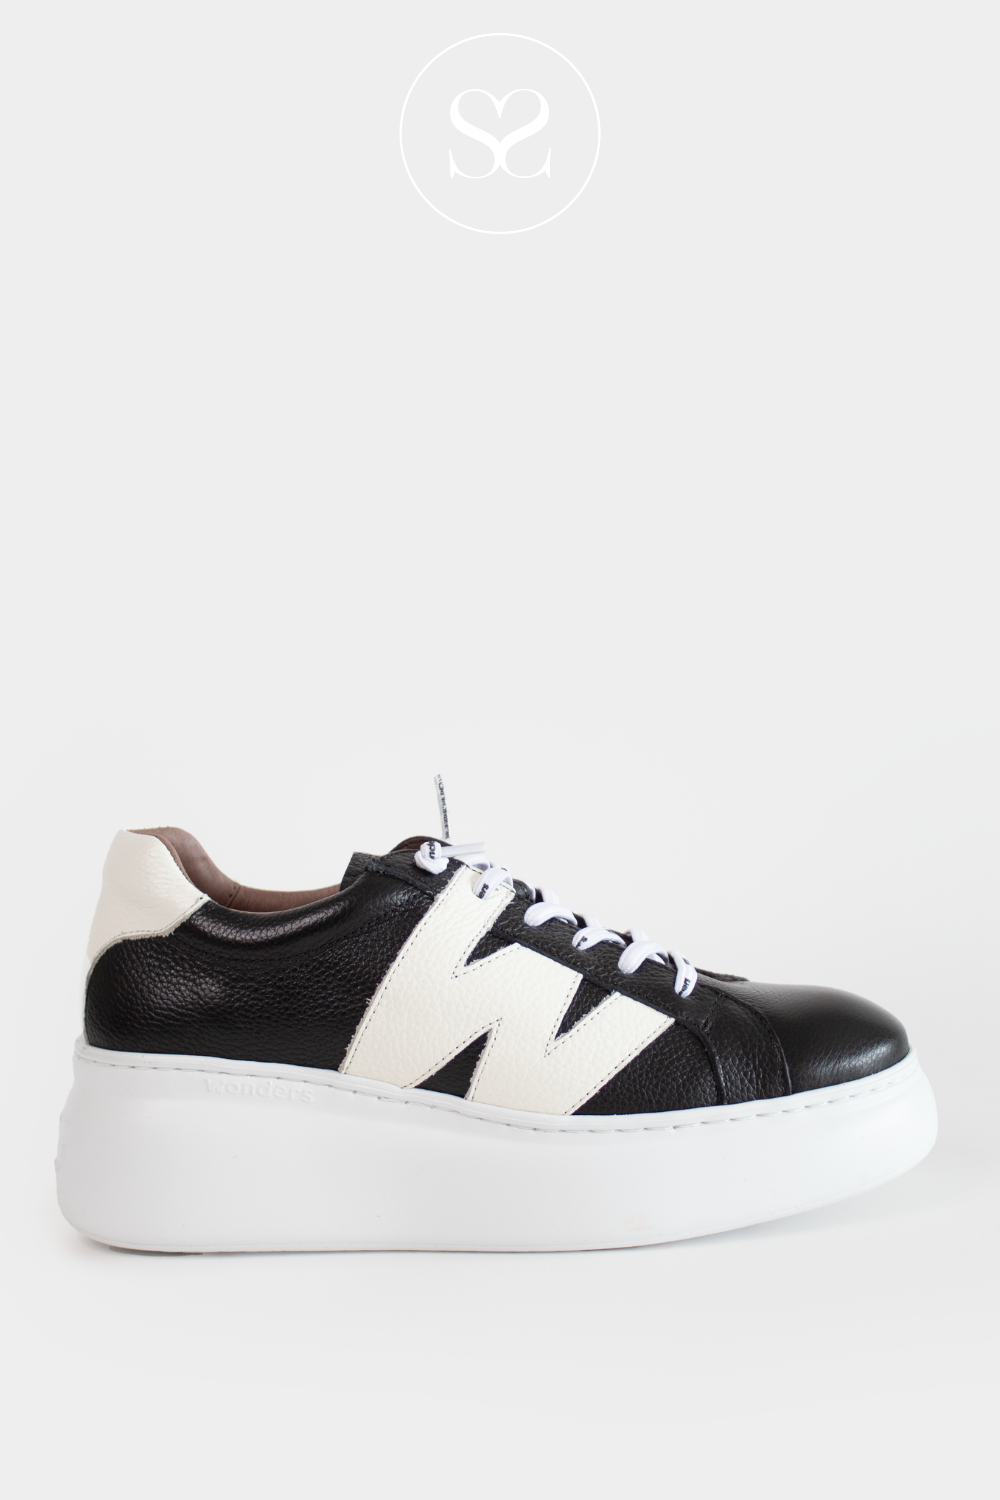 WONDERS A-2660 BLACK LEATHER PULL ON - WEDGE TRAINERS